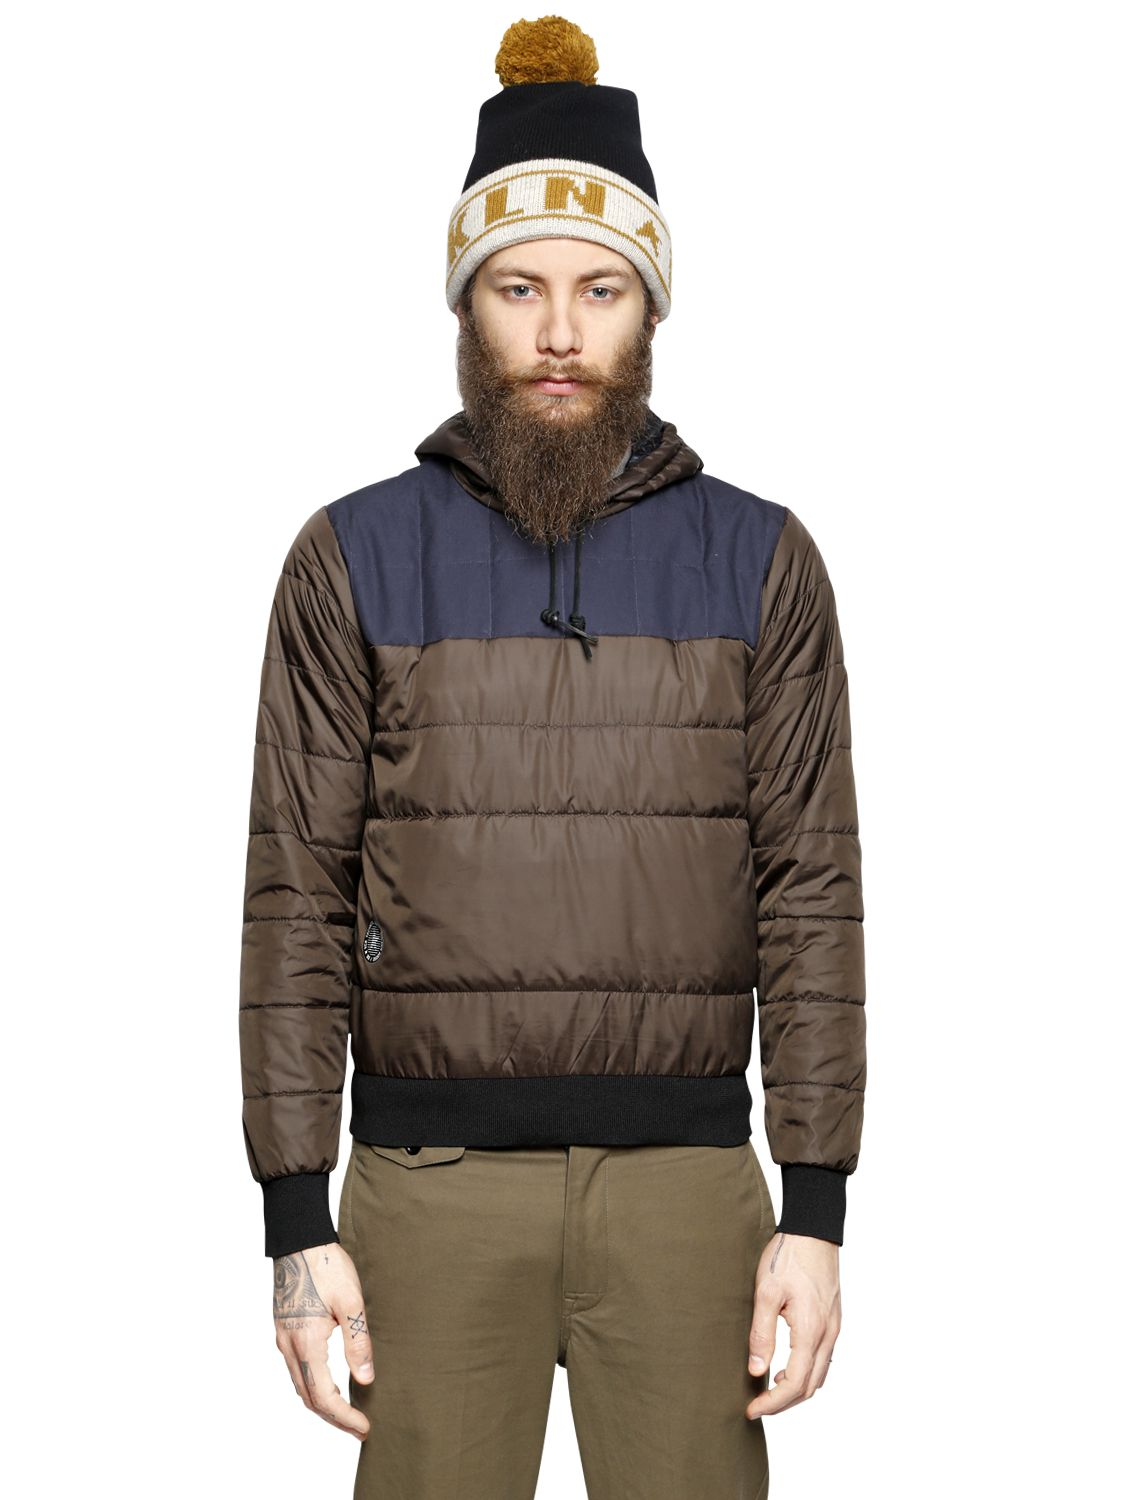 Lyst - Golden Goose Deluxe Brand Hooded Nylon & Cotton Canvas Down ...